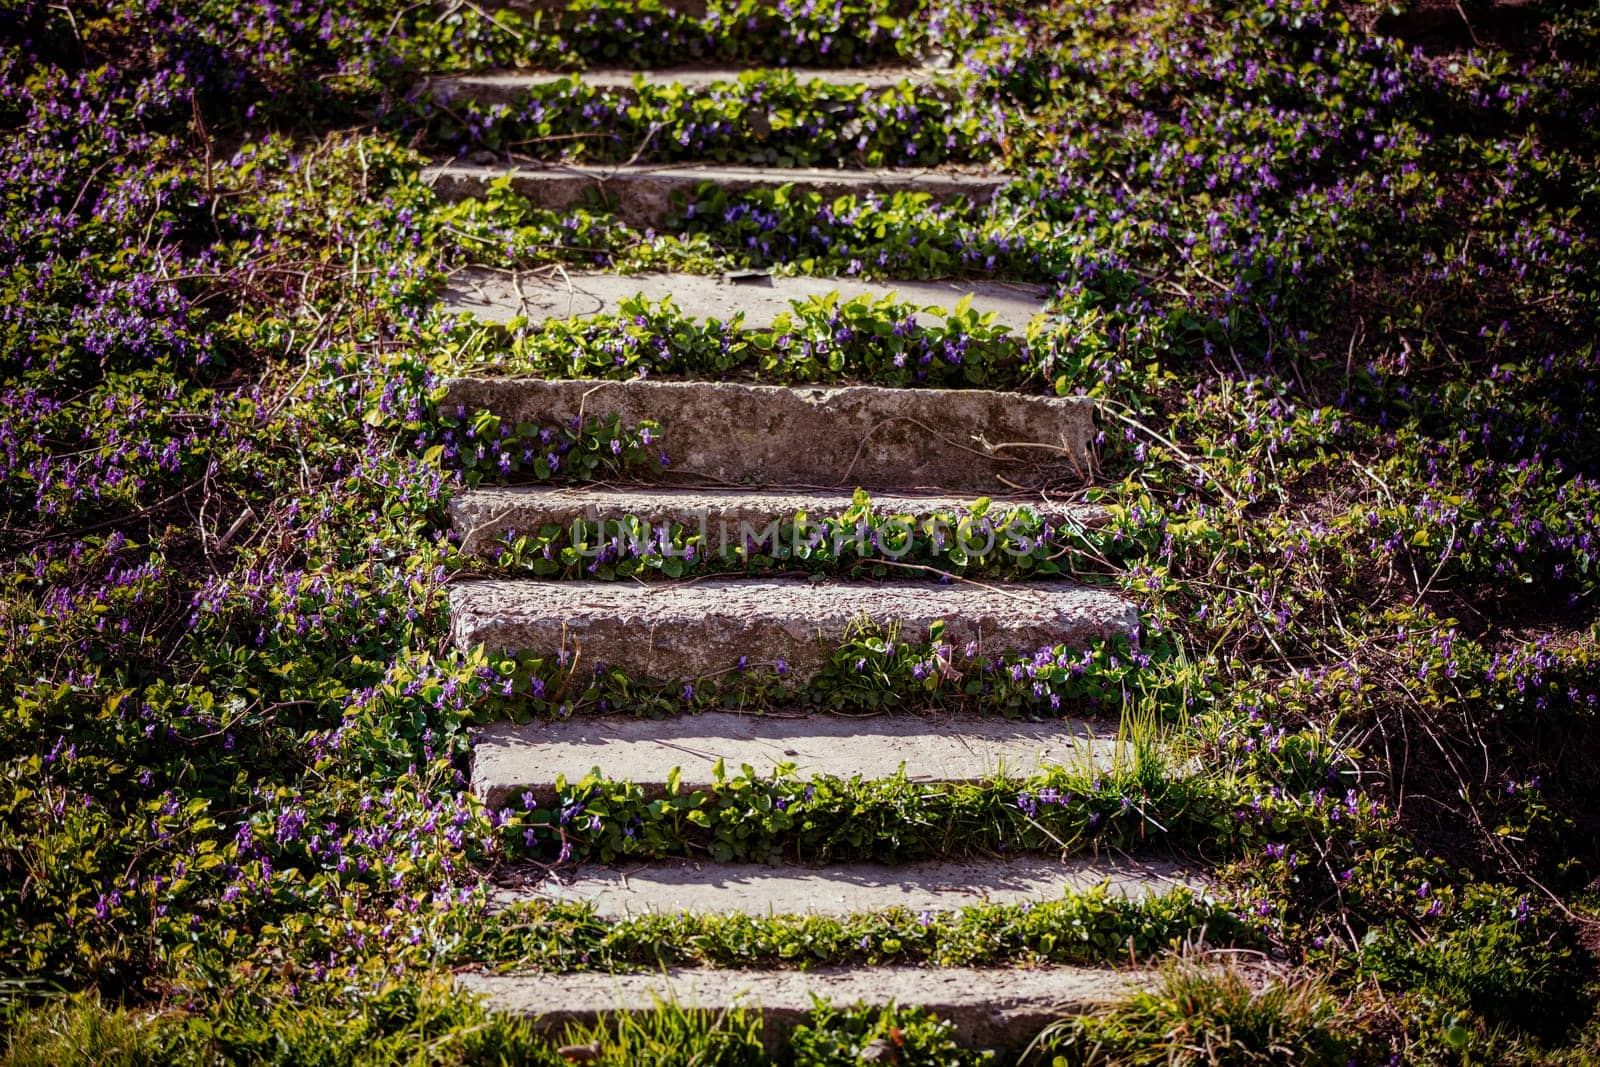 Abandoned staircase overgrown with flowers.